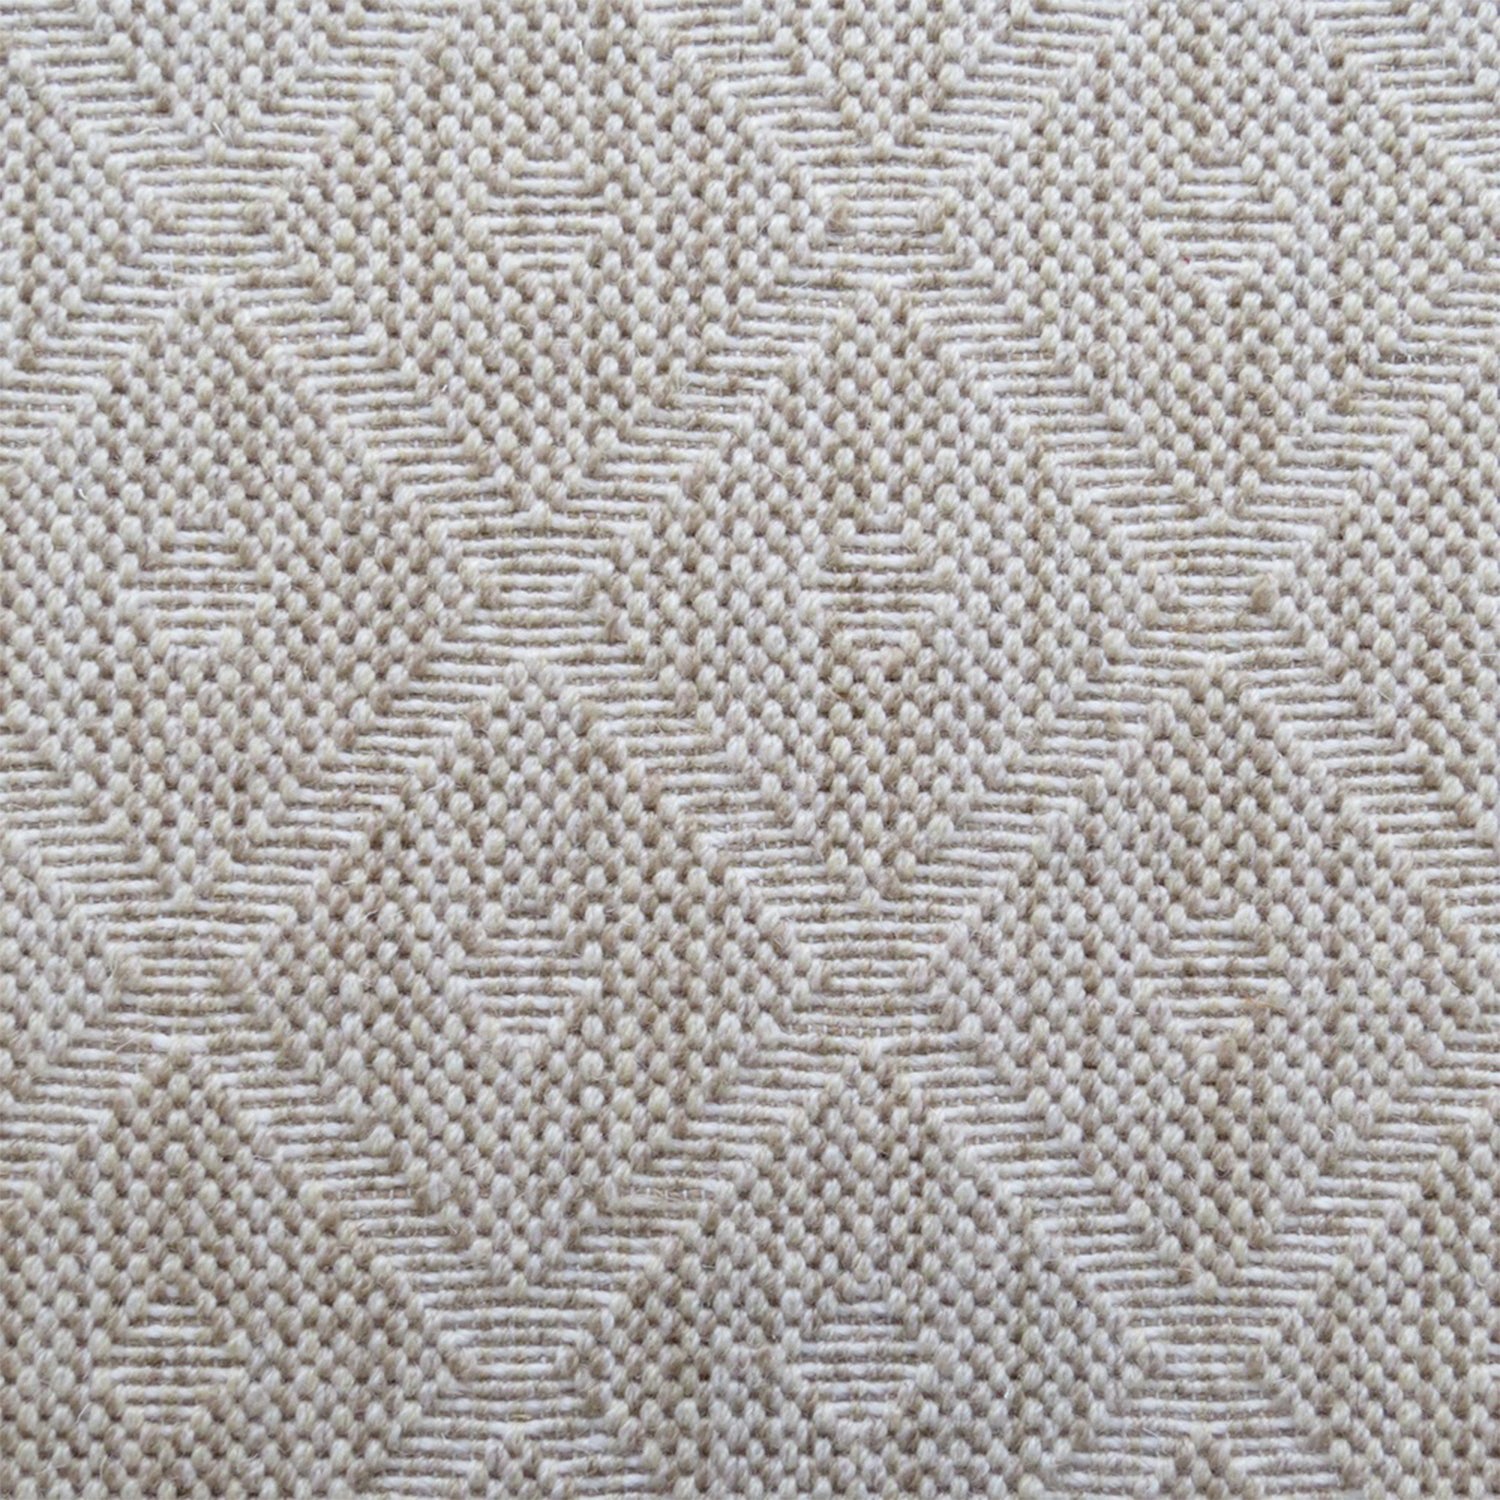 Wool broadloom carpet swatch in a repeating diamond check pattern in mottled cream and white.